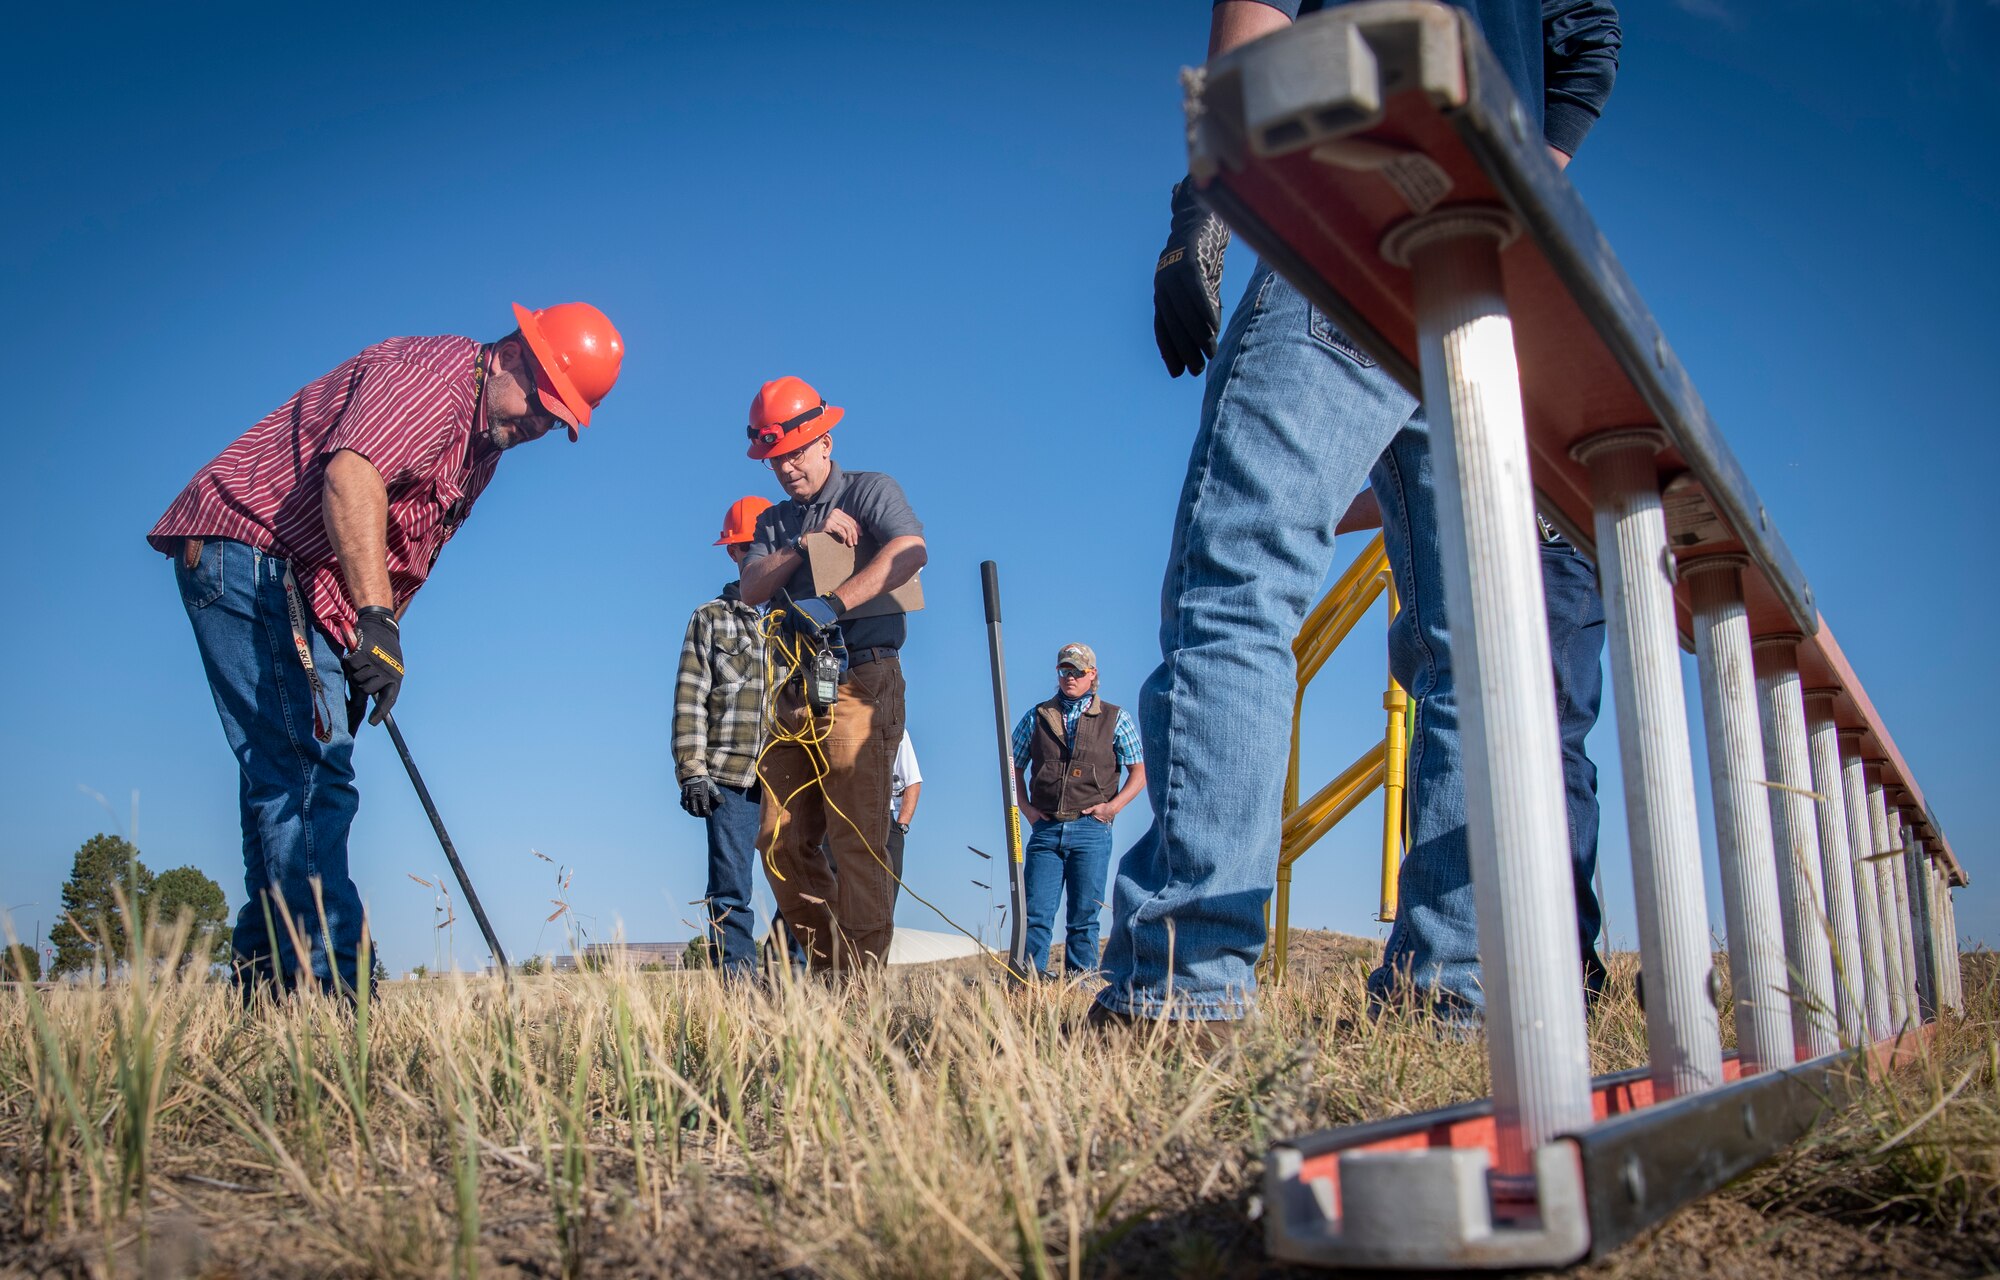 Members of the 50th Space Communications Squadron lift a manhole cover during a confined space training event Sept. 24, 2020, at Schriever Air Force Base, Colorado. A confined space is an area that has a limited means of getting in and out, is not meant for consistent work and is just large enough to enter. (U.S. Space Force photo by Airman 1st Class Jonathan Whitely)